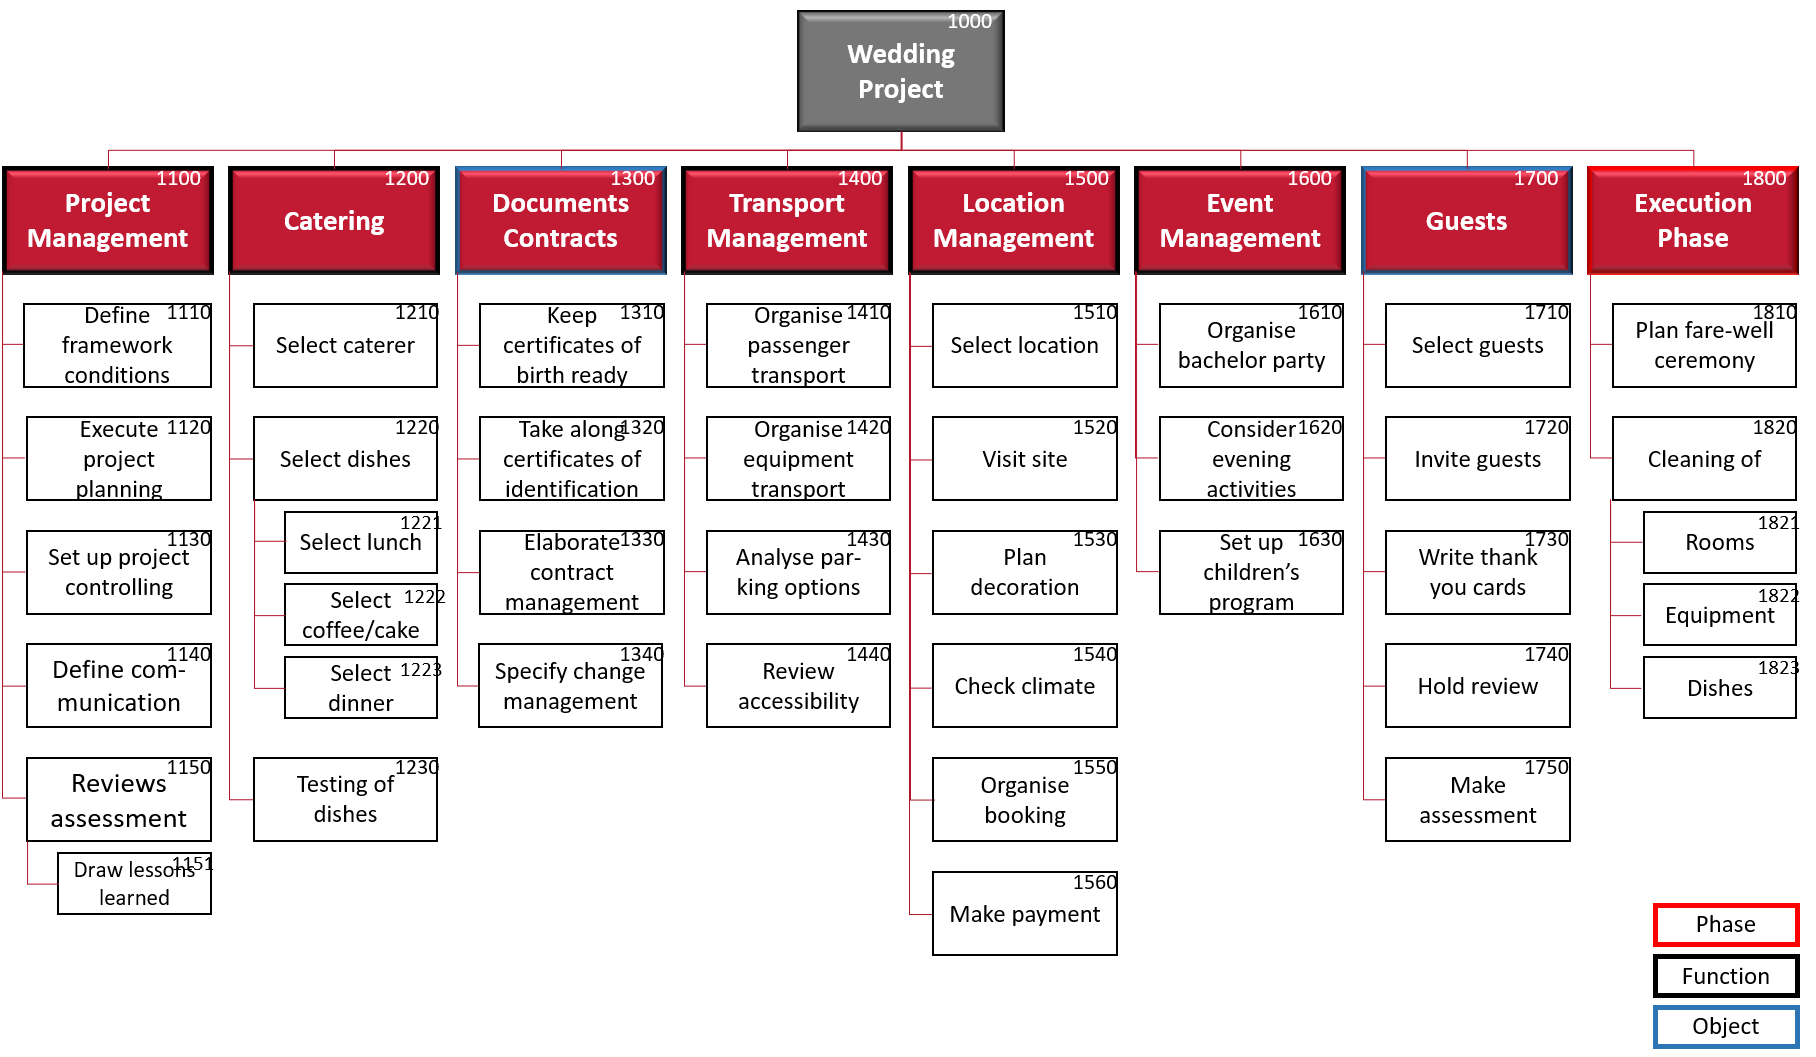 Sample solution of the wedding's work breakdown structure.